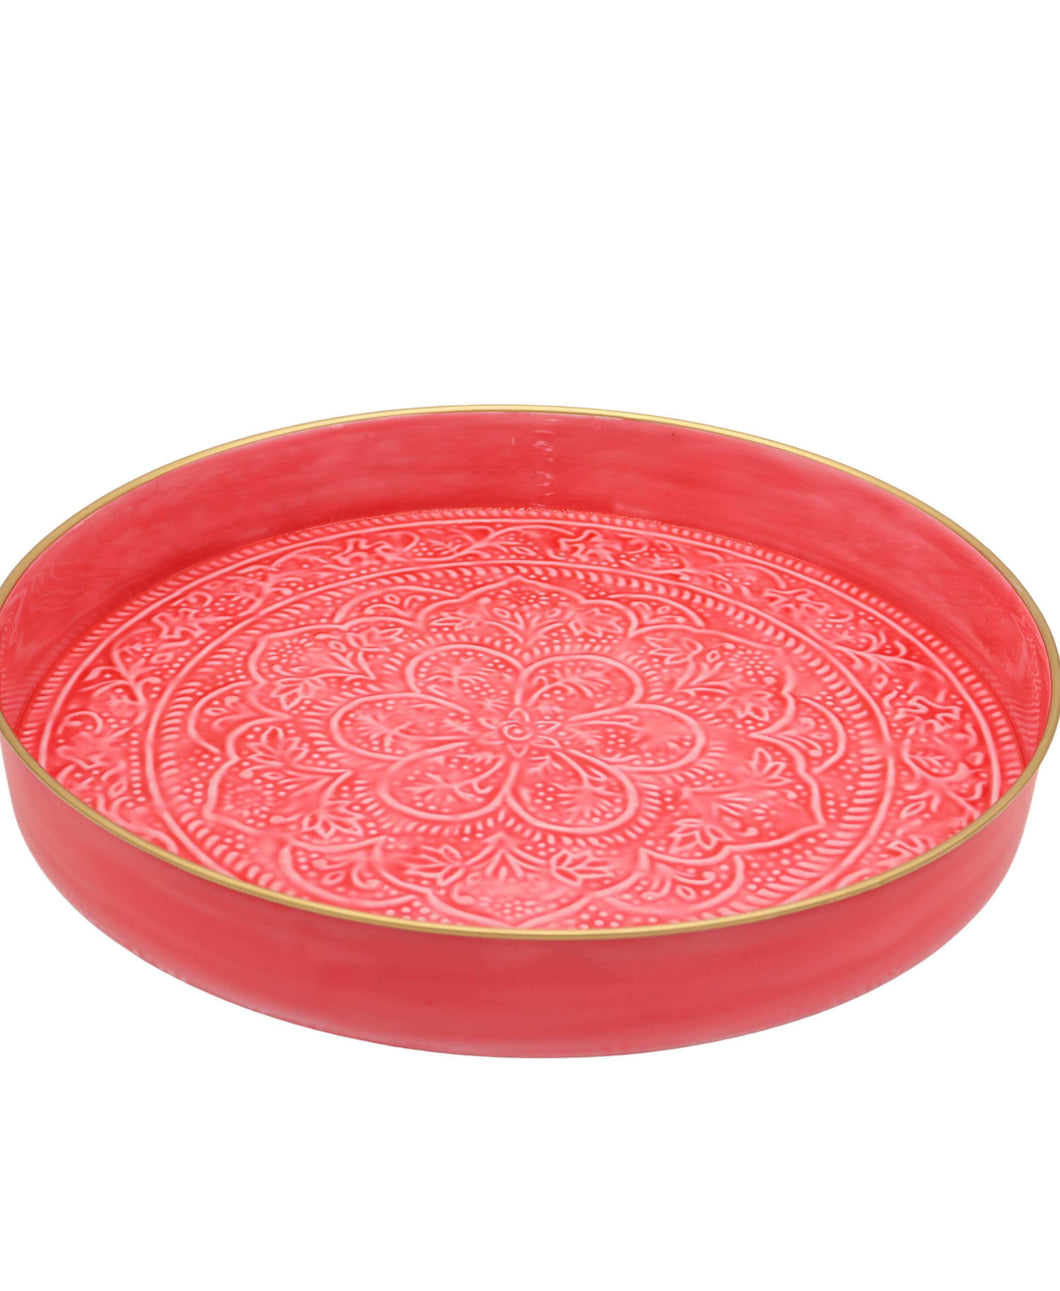 Large Bright Pink Tray